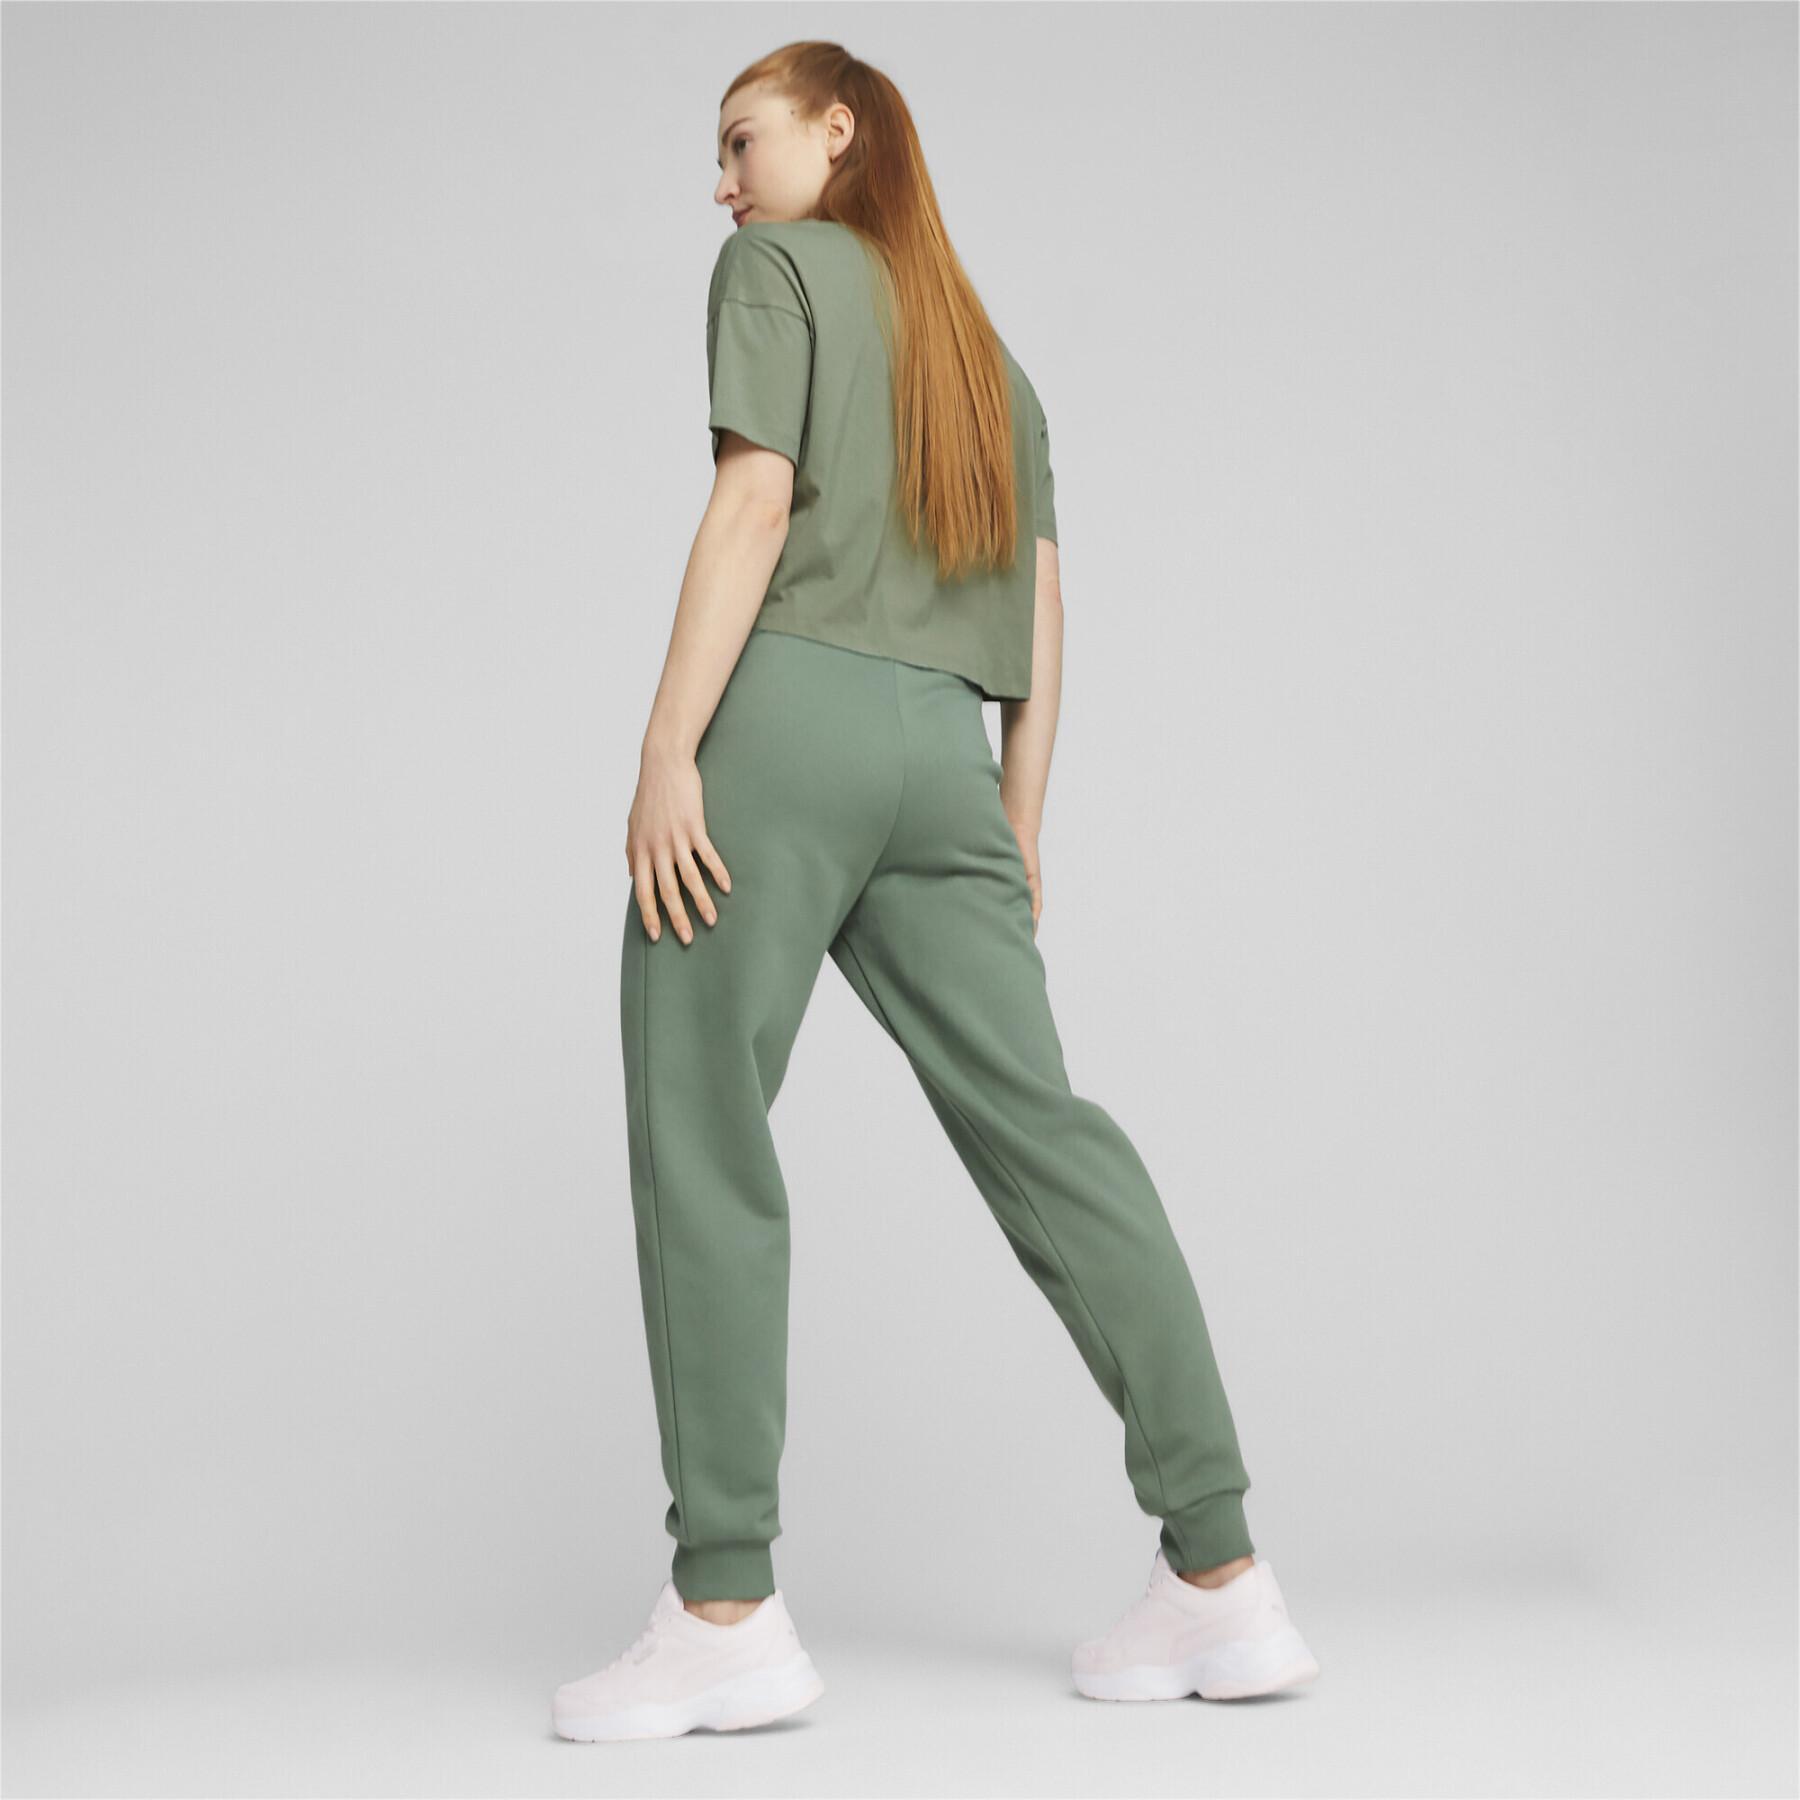 Women's embroidered high-waisted jogging suit Puma Essentials+ FL cl